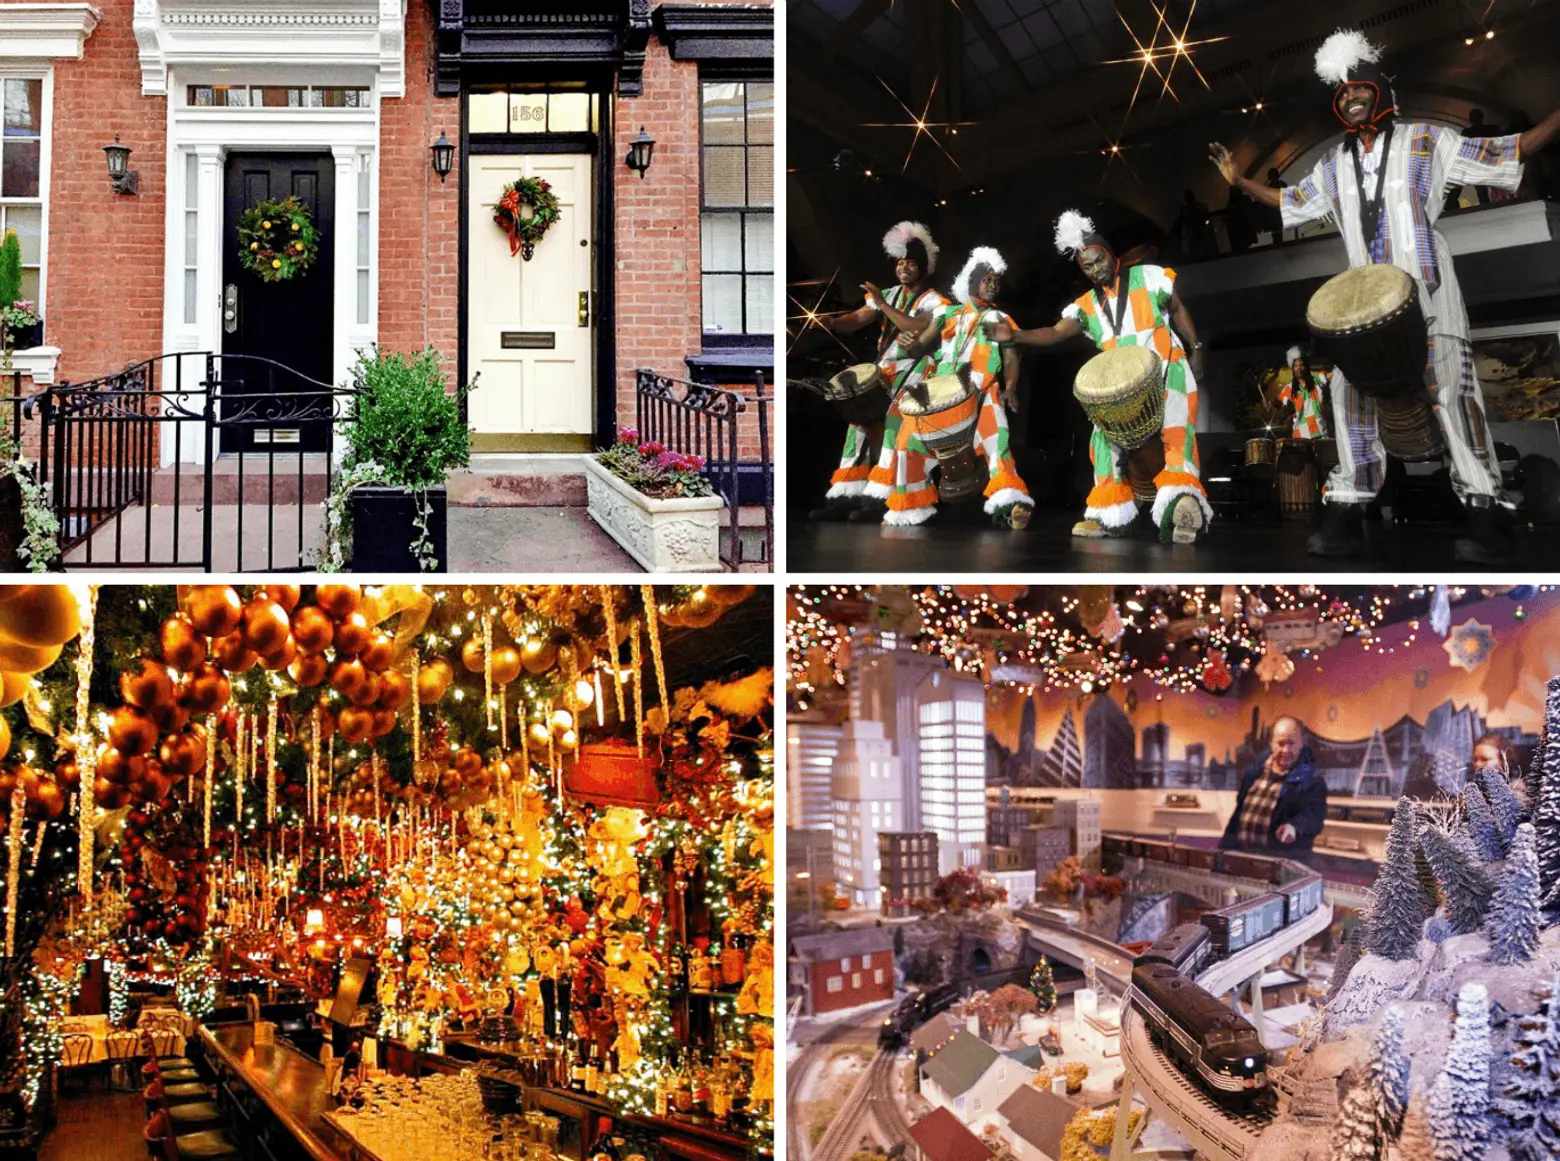 The 10 best holiday events and activities for NYC history buffs